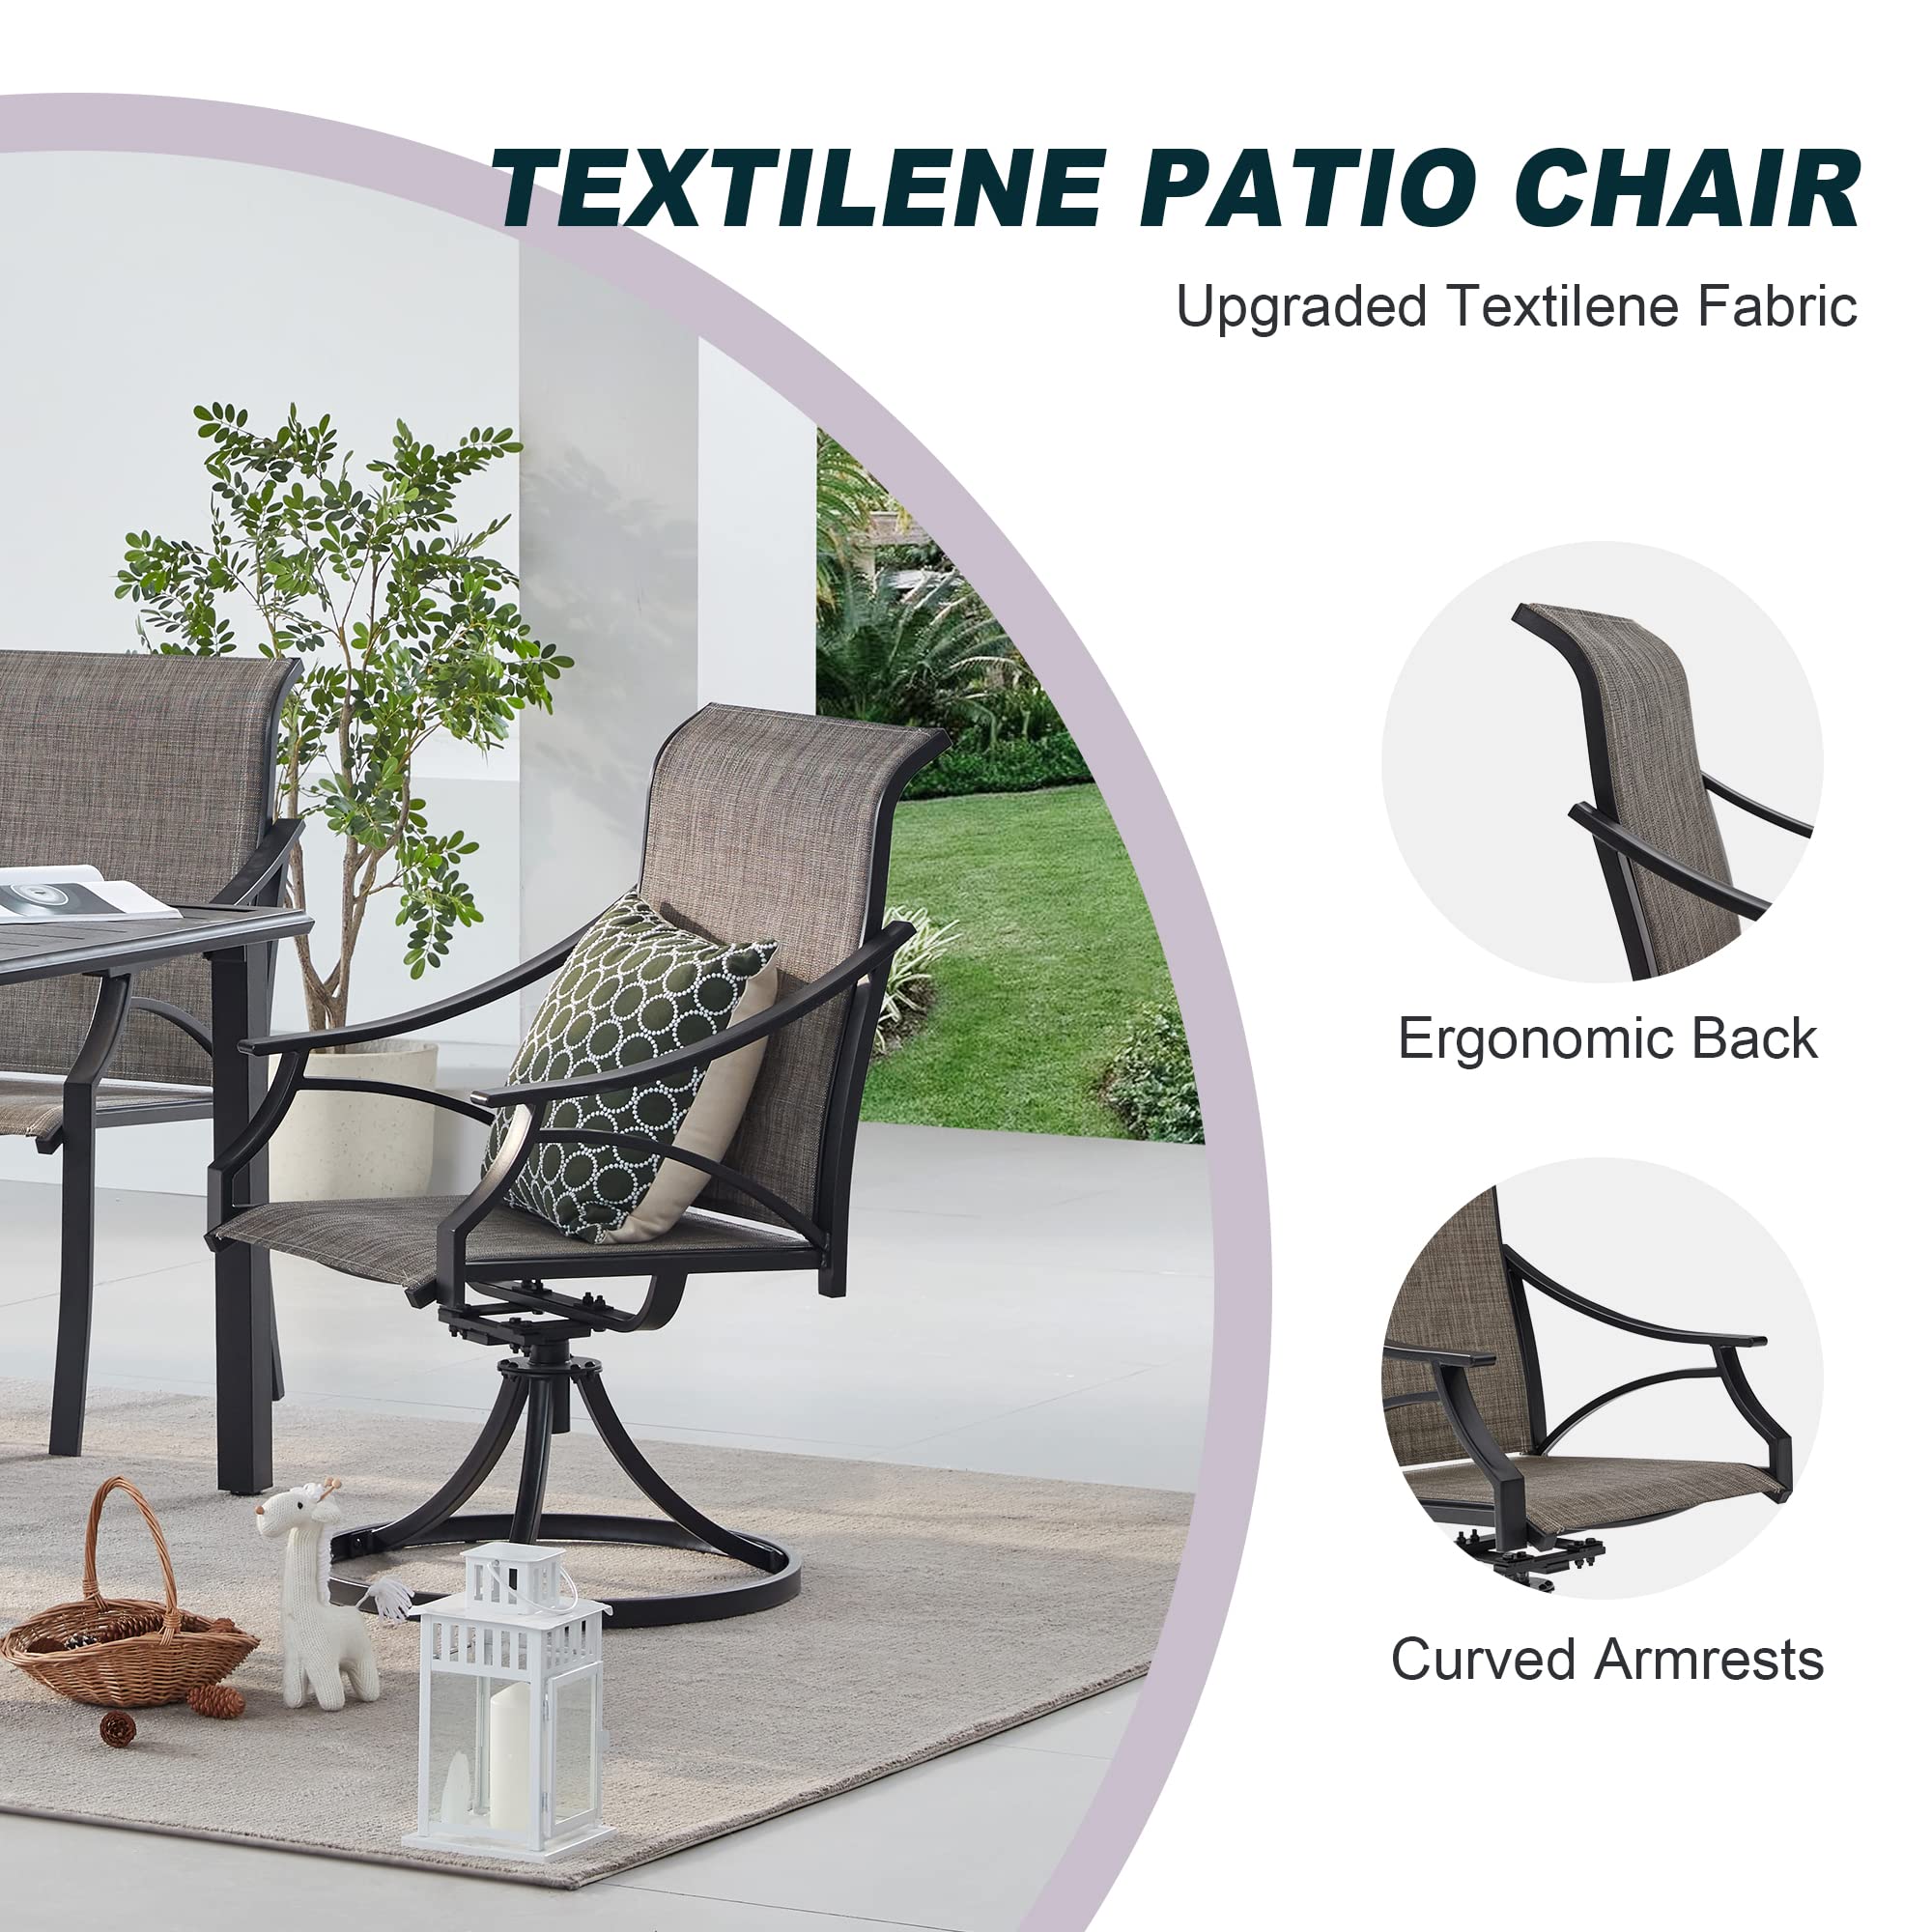 Vicllax Patio Swivel Chairs Set of 2/4/6, Outdoor Textilene Swivel Dining  Chair